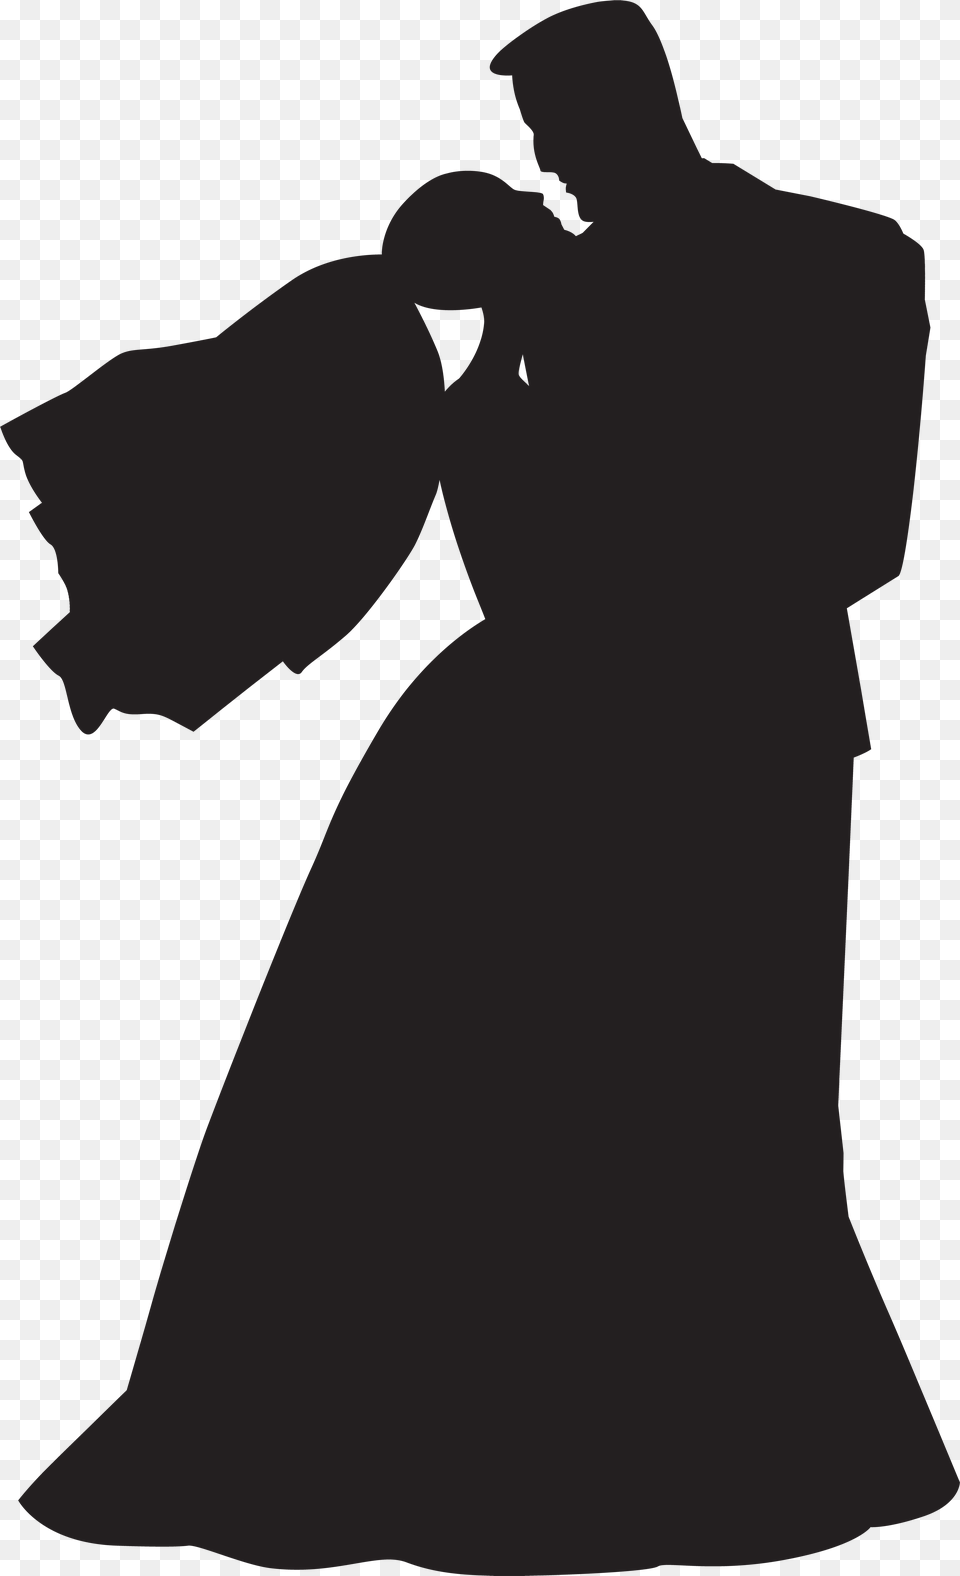 Dance Silhouette Couple Clip Art Chess Piece Transparent, Formal Wear, Wedding Gown, Clothing, Dress Png Image